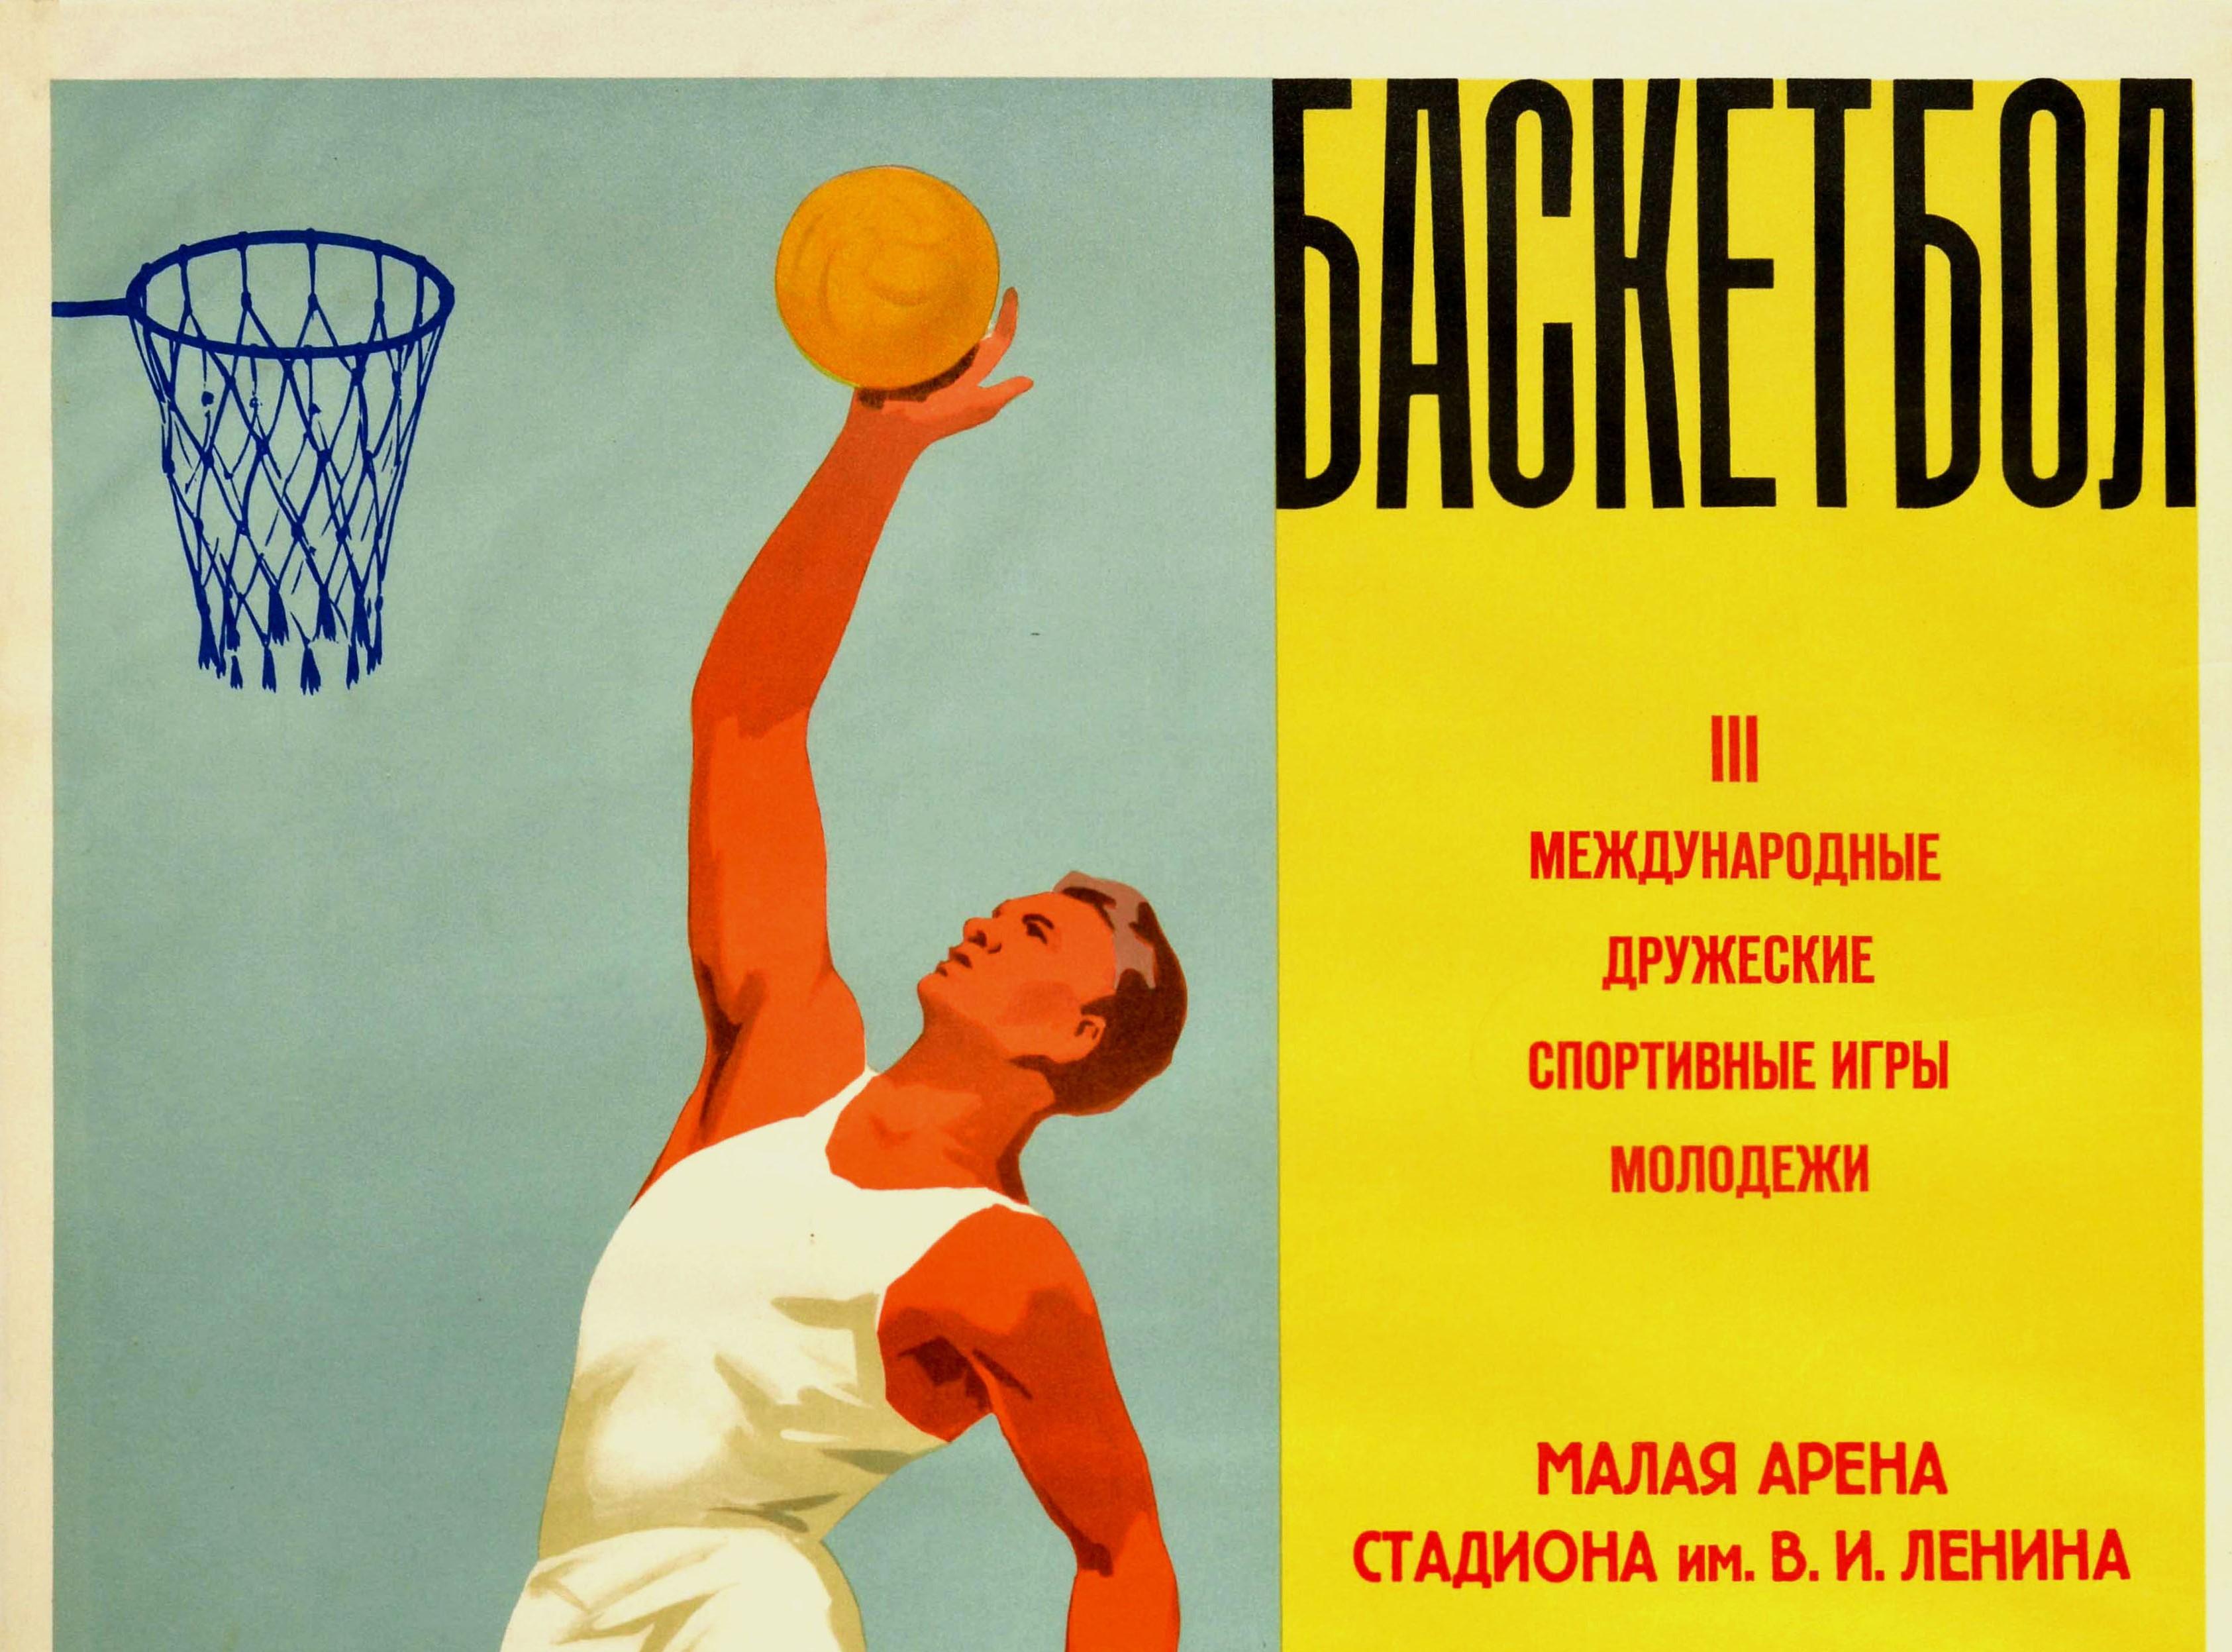 Original vintage sport poster for a basketball competition at the III International Friendship Moscow Youth Games held from 30 July to 9 August 1957 at the Small Arena of the Stadium named after Vladimir Lenin featuring a basketball player in white